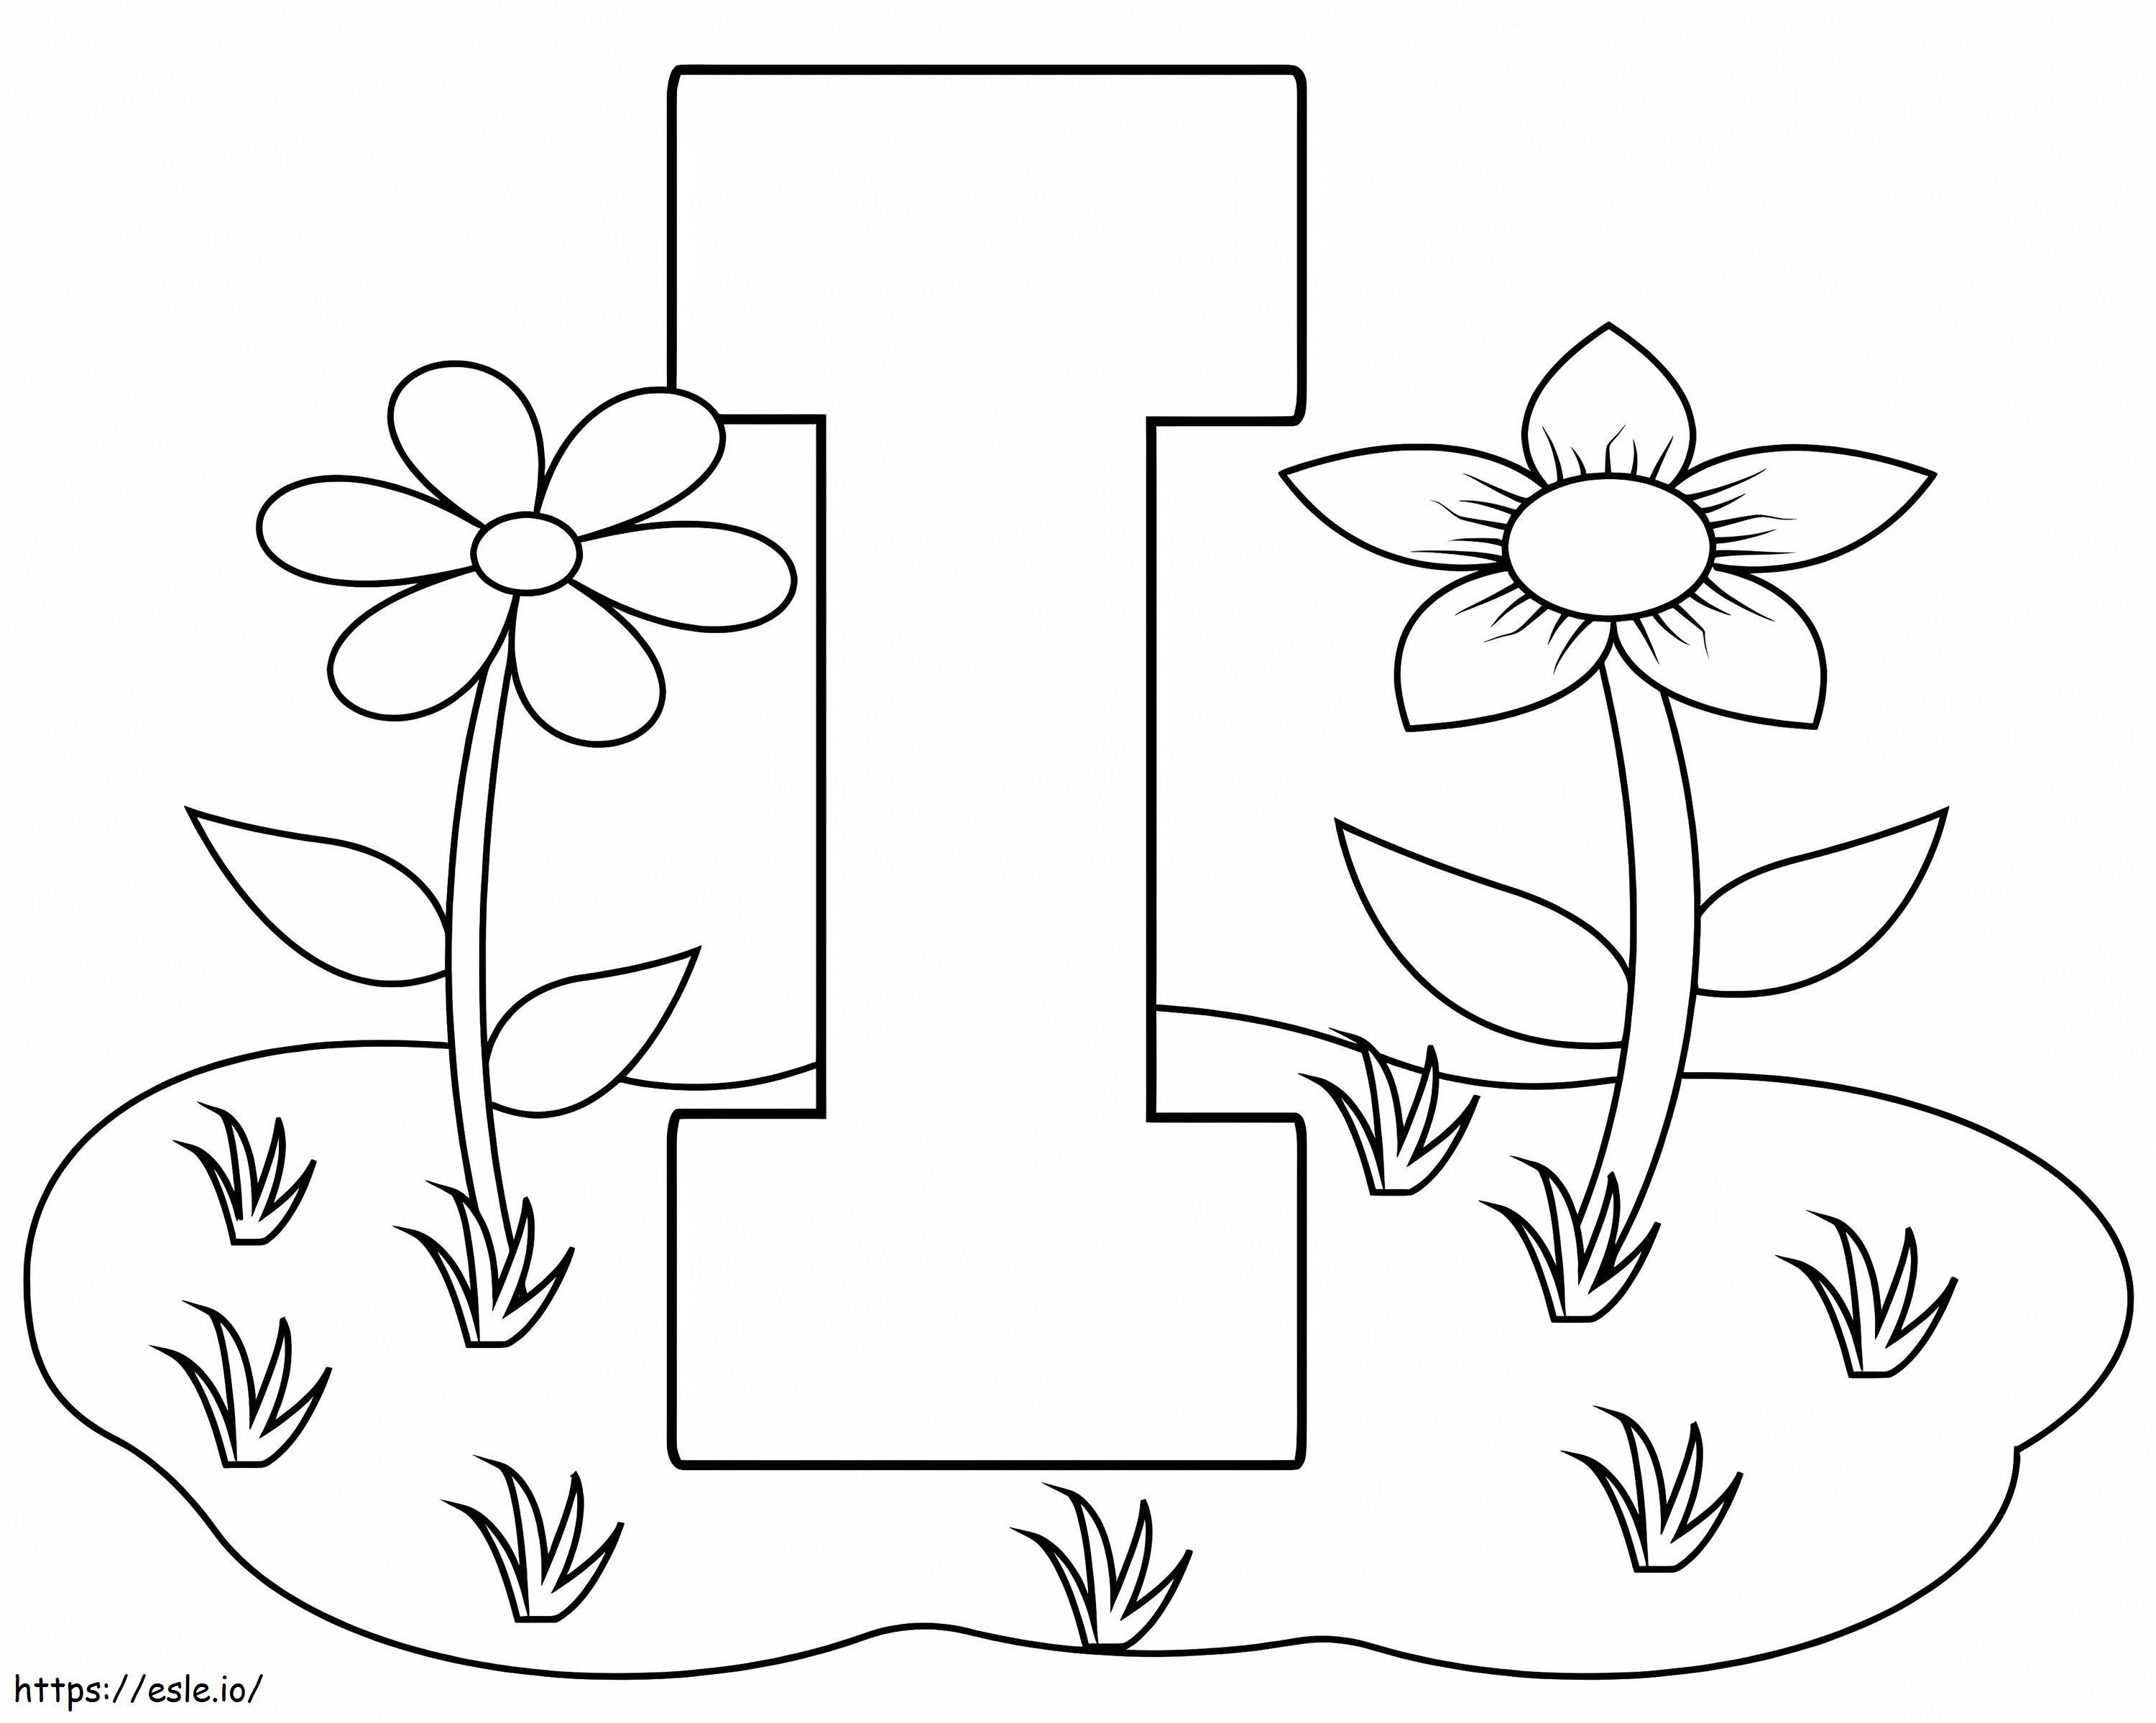 Letter I 10 coloring page